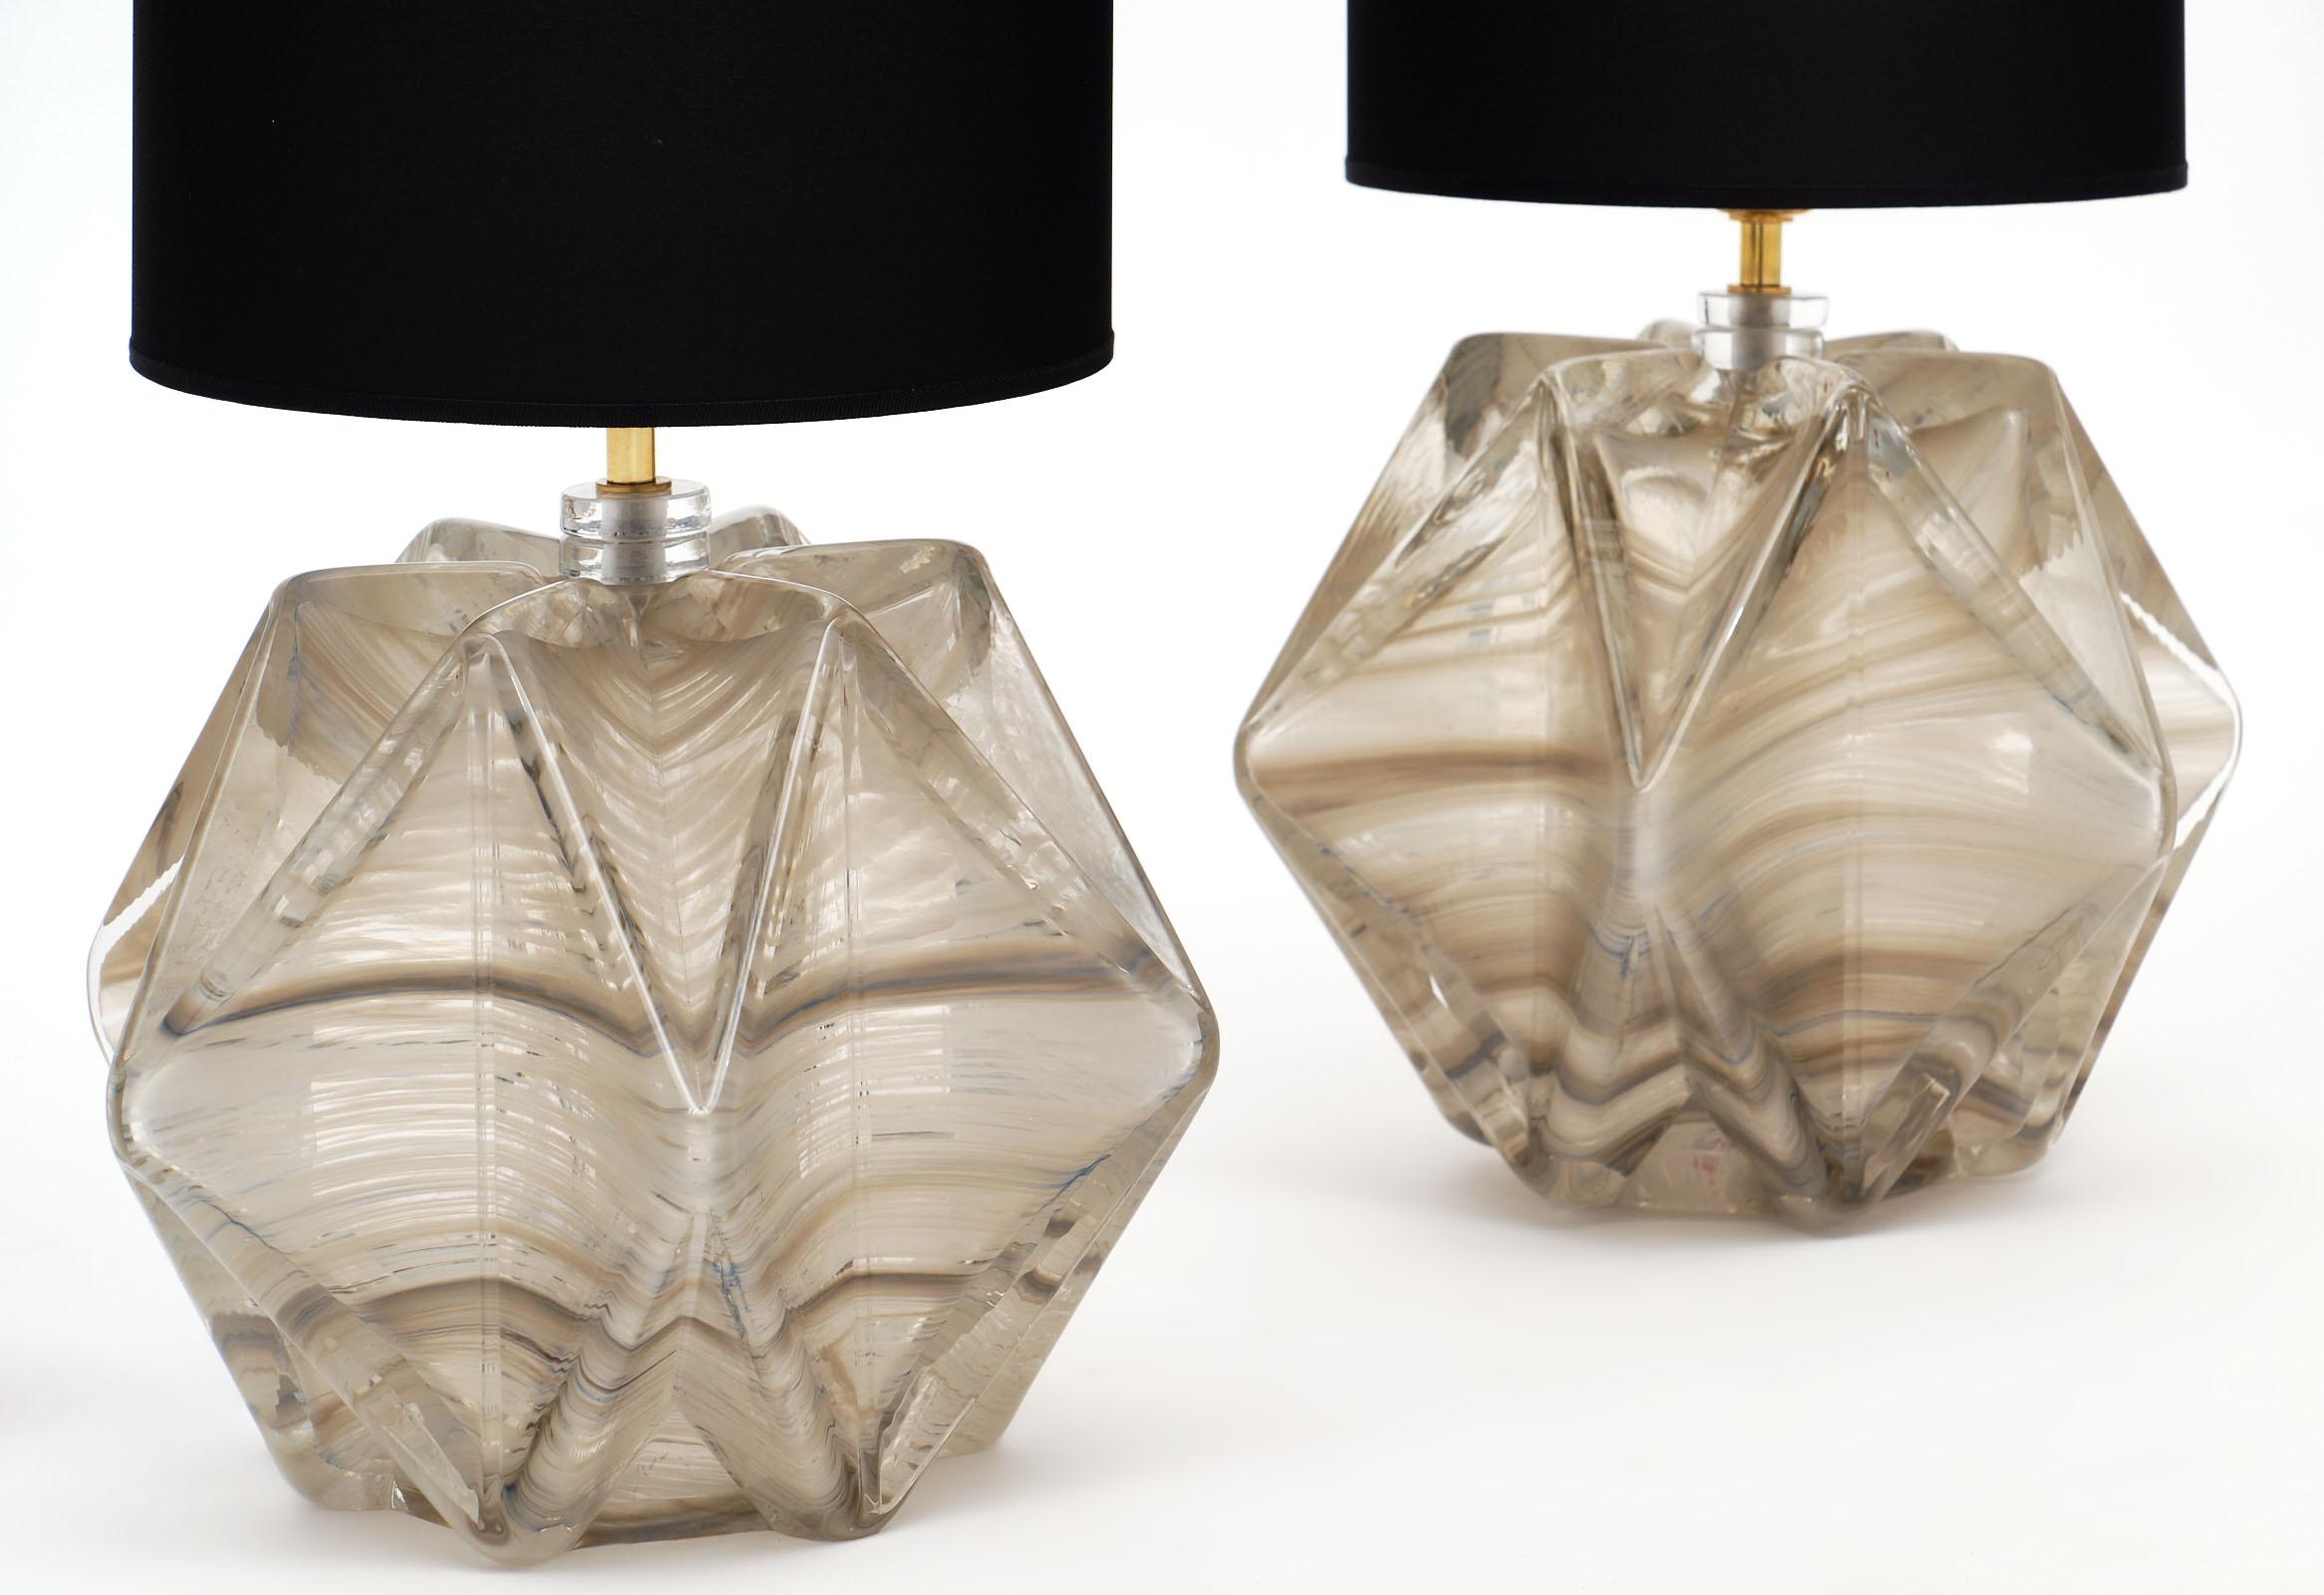 Modernist Murano glass lamps by Donghia. These fixtures are made of beautiful hand blown glass with a marbleized effect and excellent shape. They have been newly wired to fit US standards.